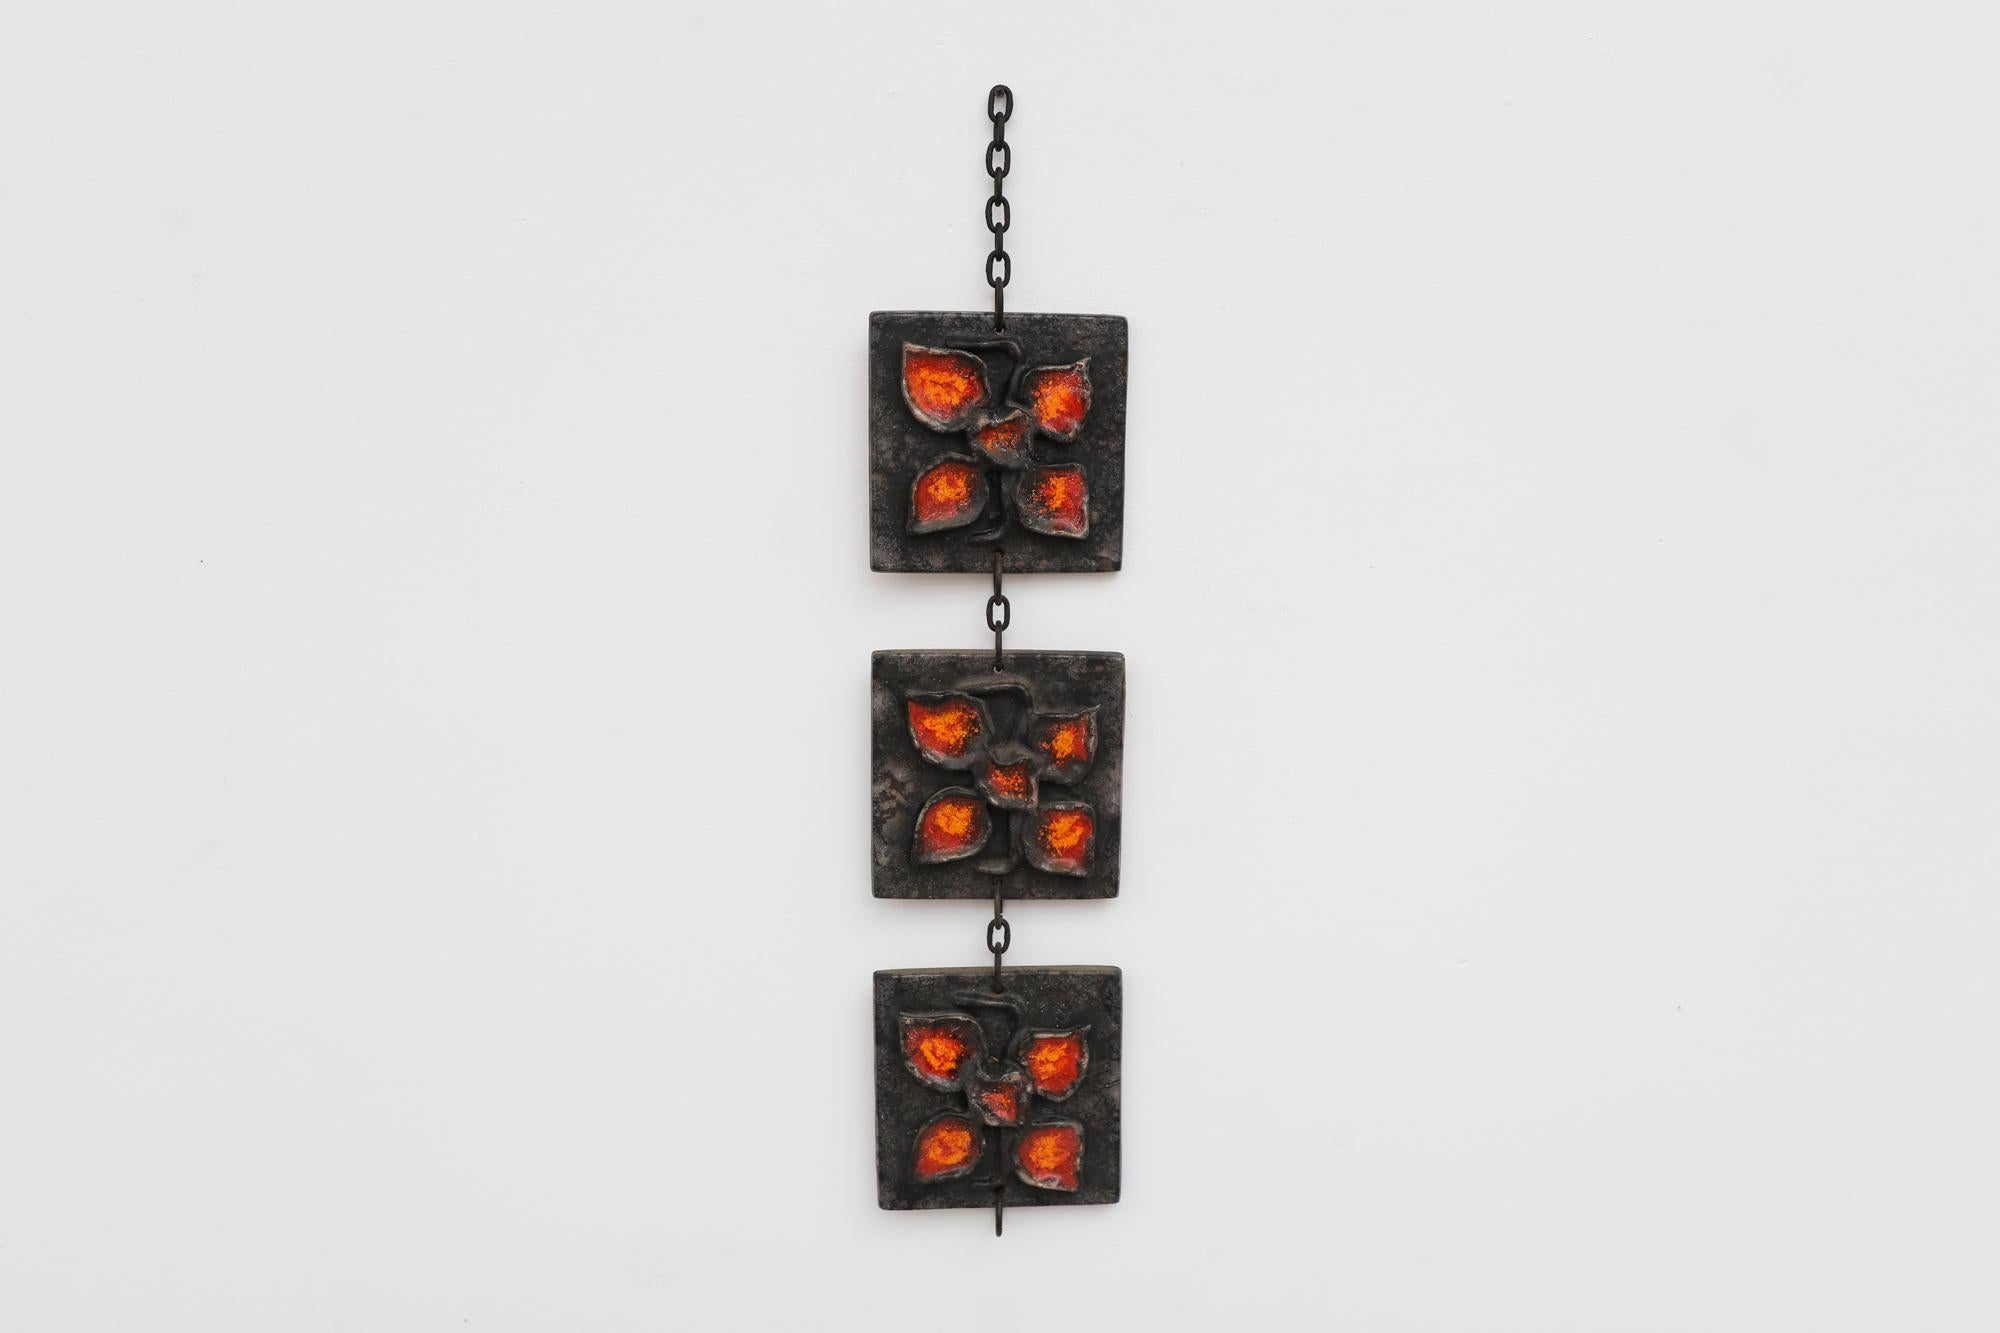 Vintage 1970's Carstens Tönnieshof Atelier West German ceramic wall plaque with 3 heavy sculptural ceramic tiles linked by thick blackened steel chain. Originally found hanging in gardens, sun rooms and kitchens to introduce fun pops of color. In